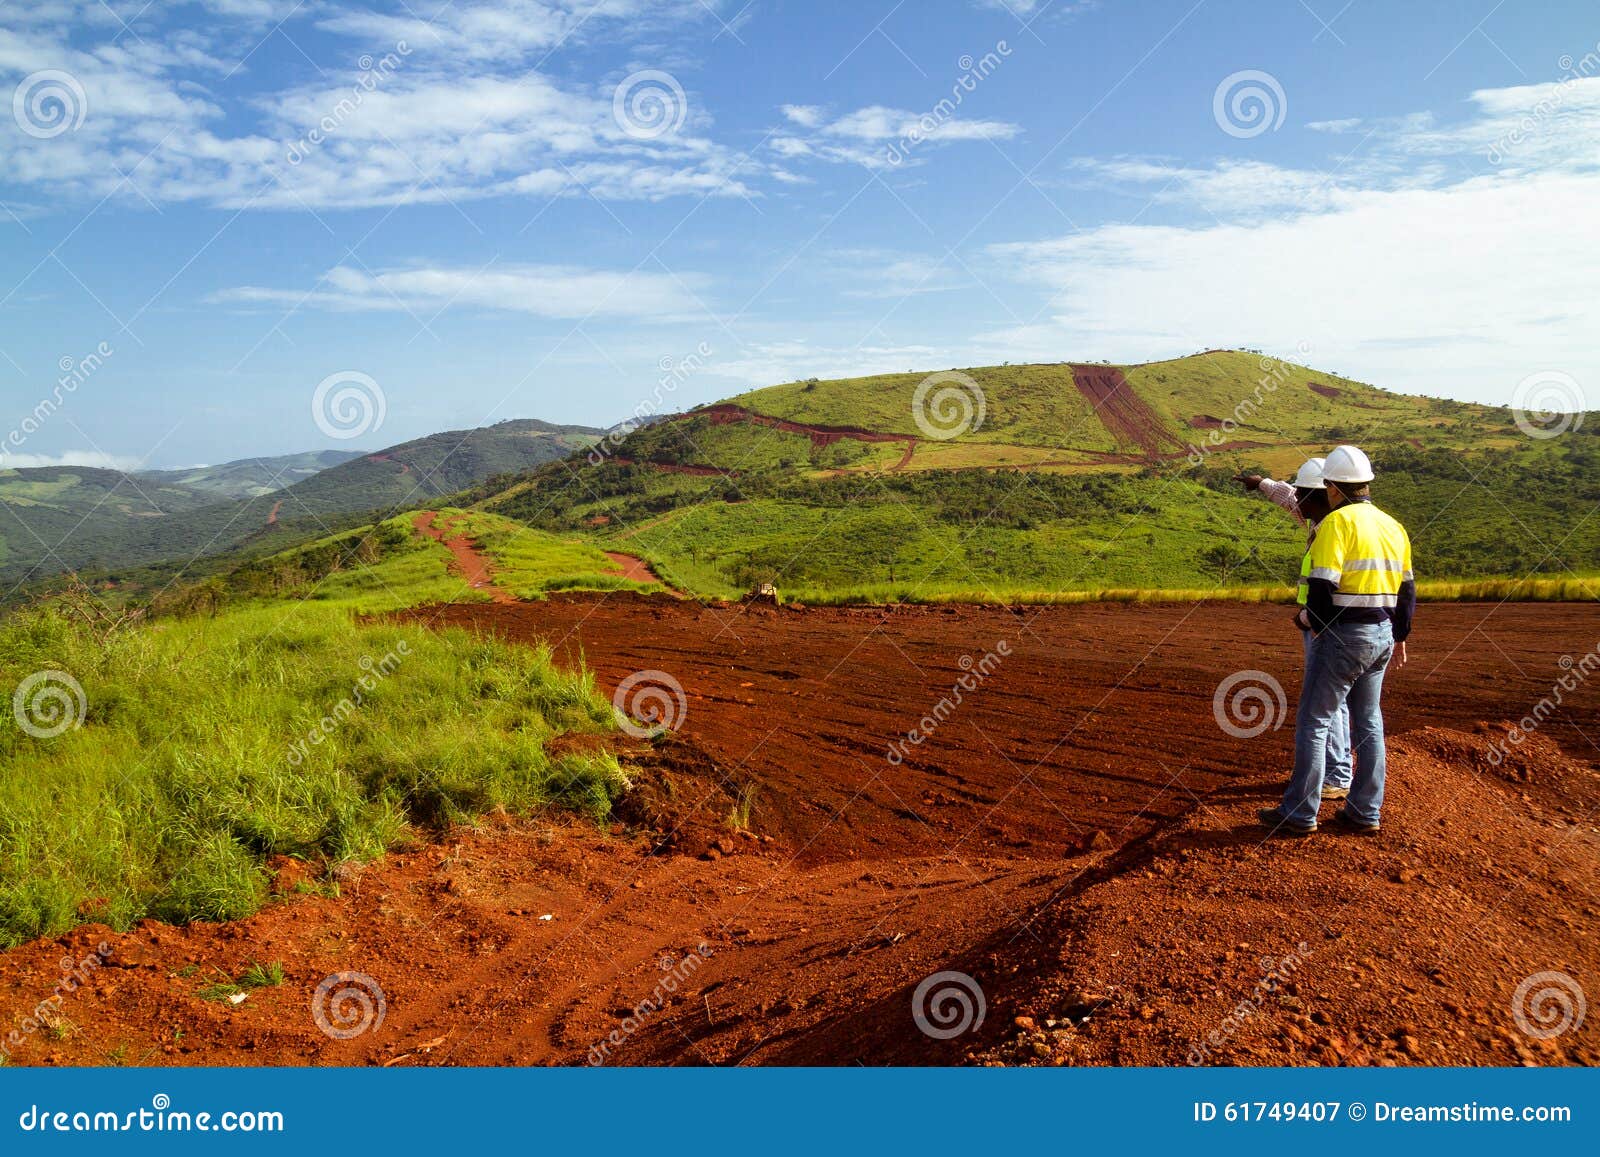 mining construction workers on mountain top in sierra leone